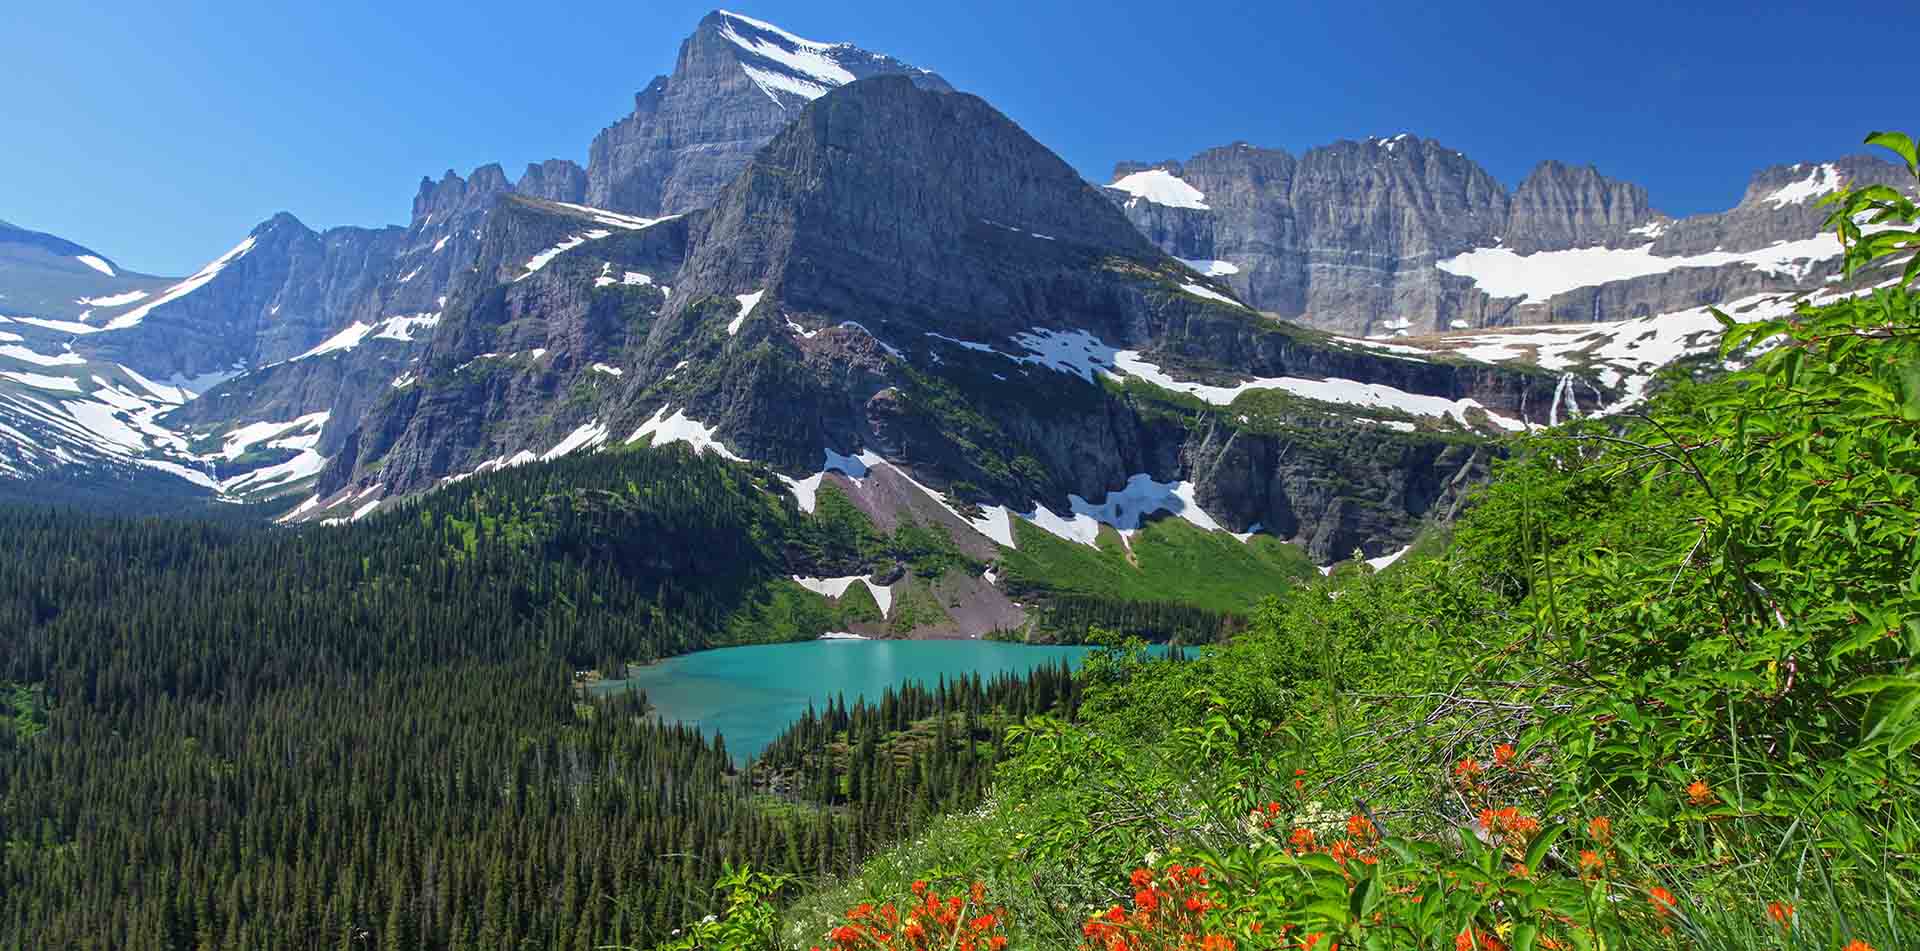 The 5 Best Views in Glacier National Park - Classic Journeys